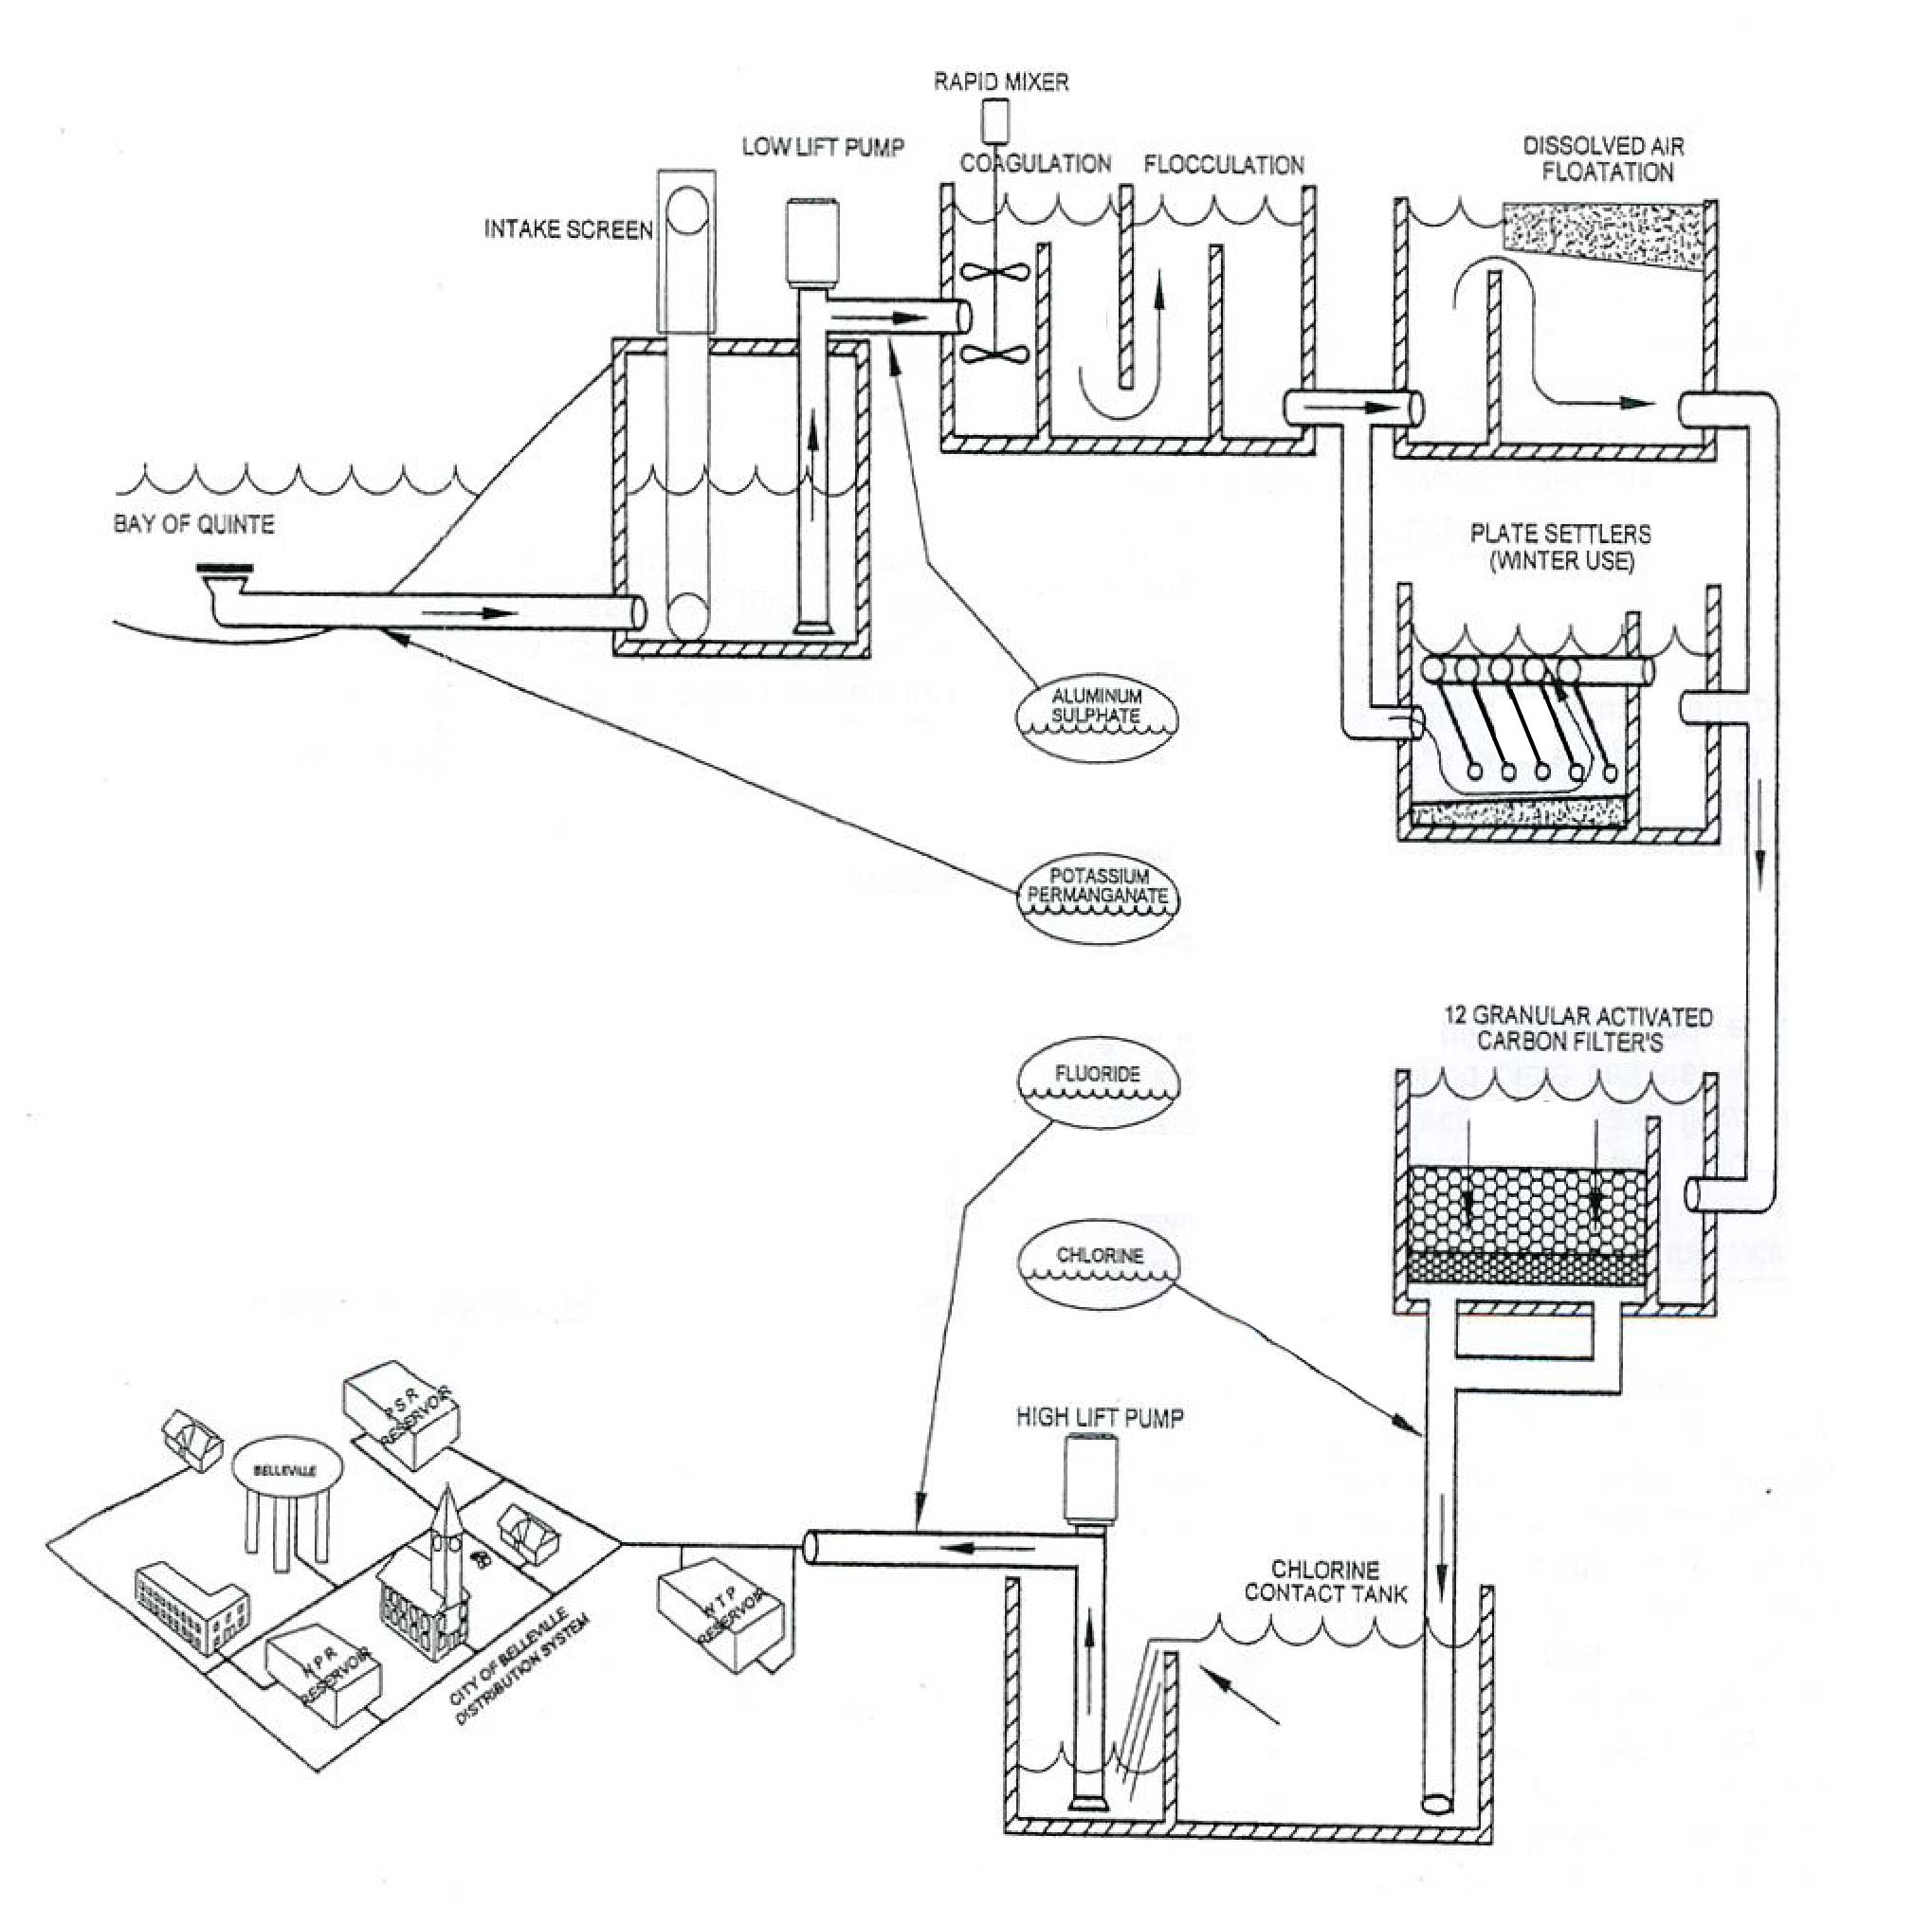 Water Treatment Plant diagram shows how water travels from the Bay of Quinte through the water treatment plant and to our distribution system.